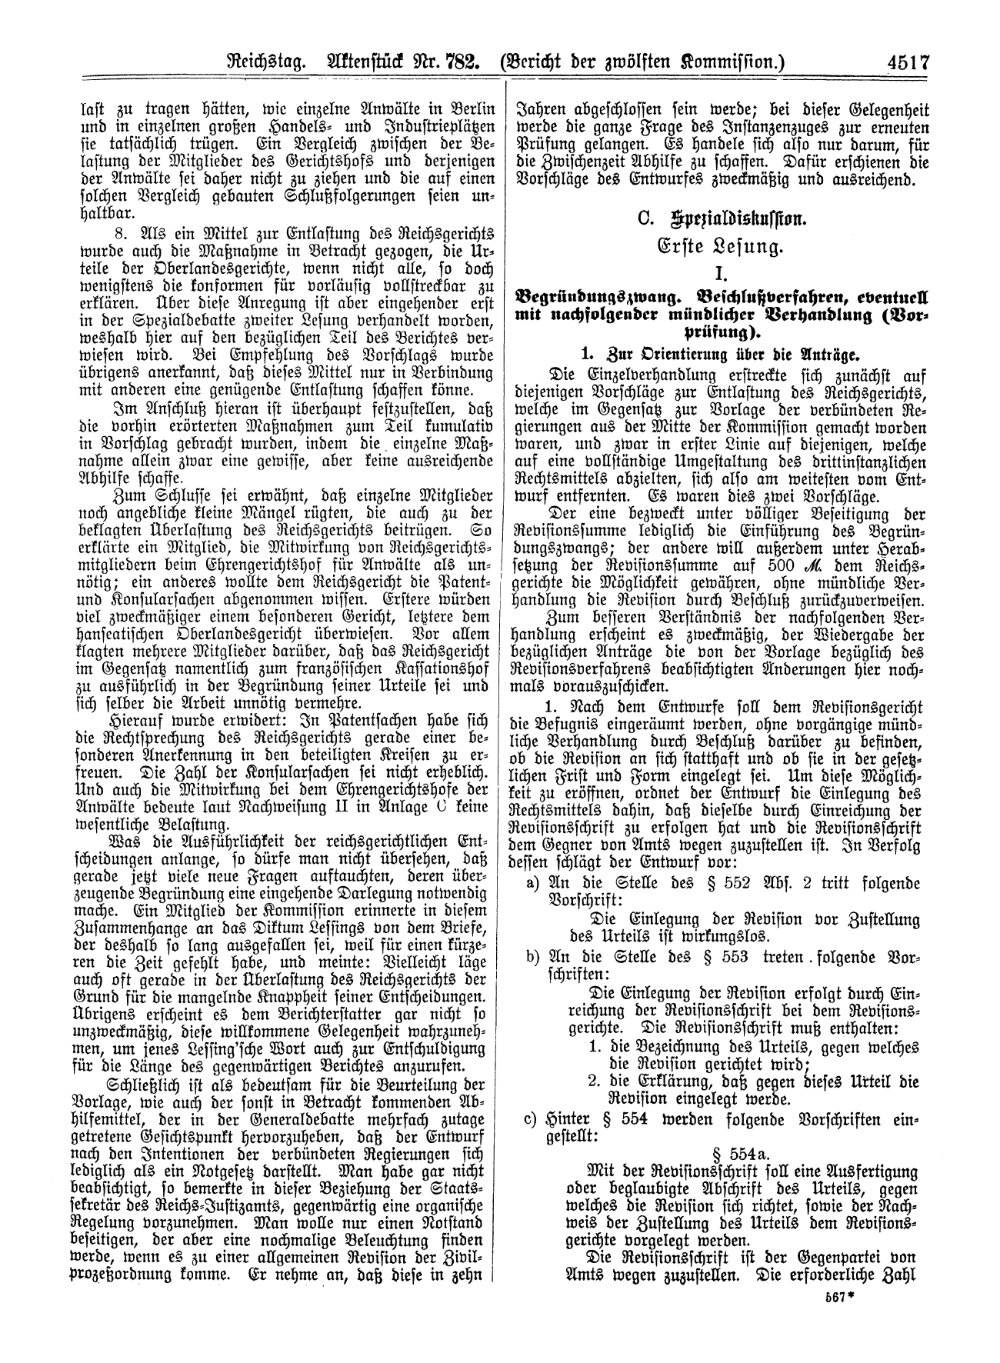 Scan of page 4517